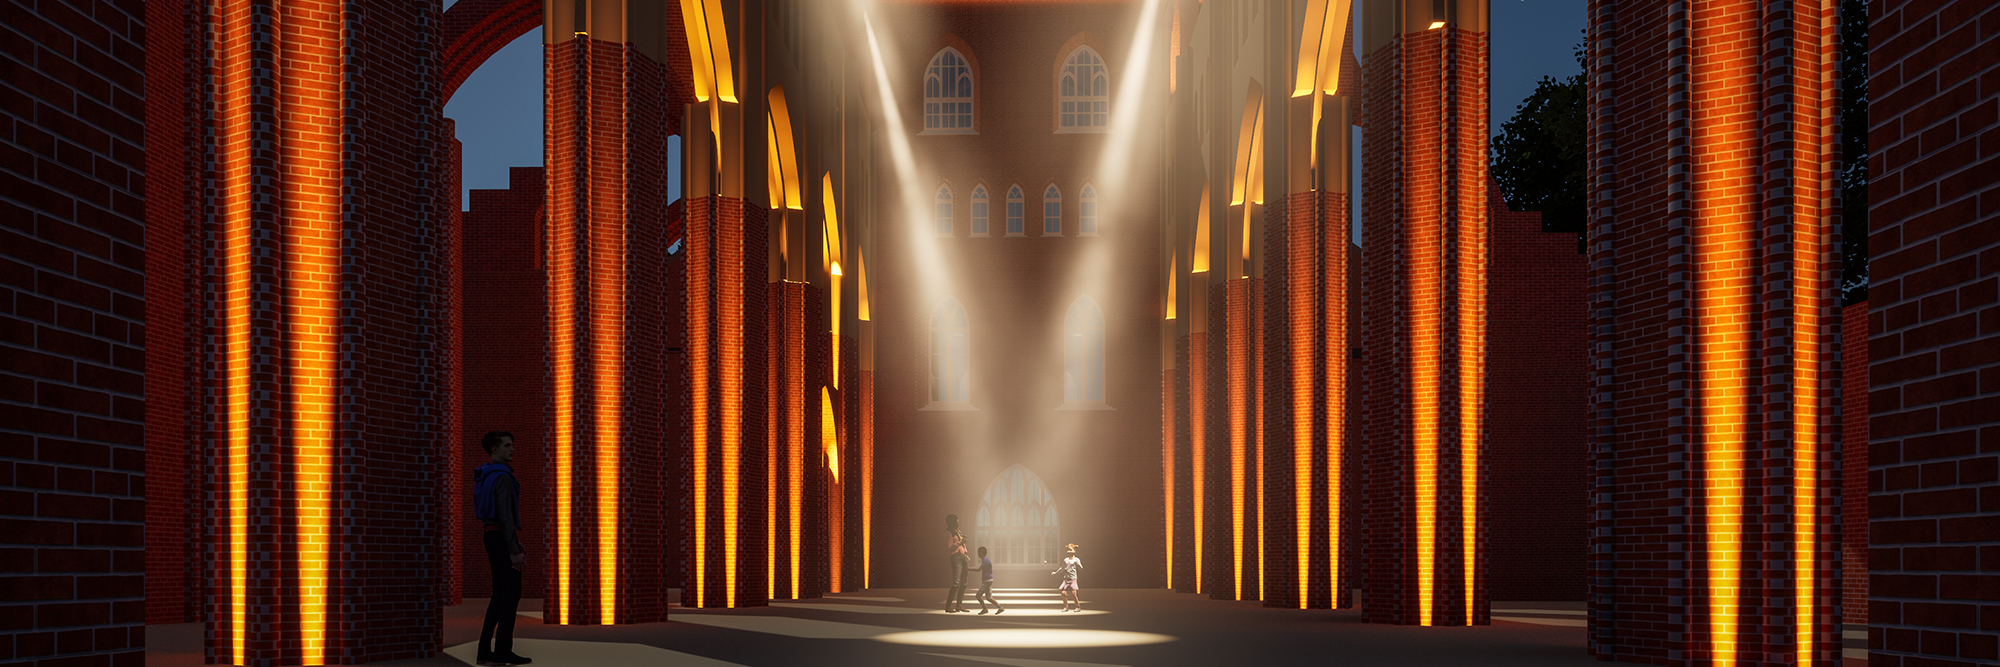 Tartu Cathedral lighting design proposal. Dynamic lighting between the architectural ruins.